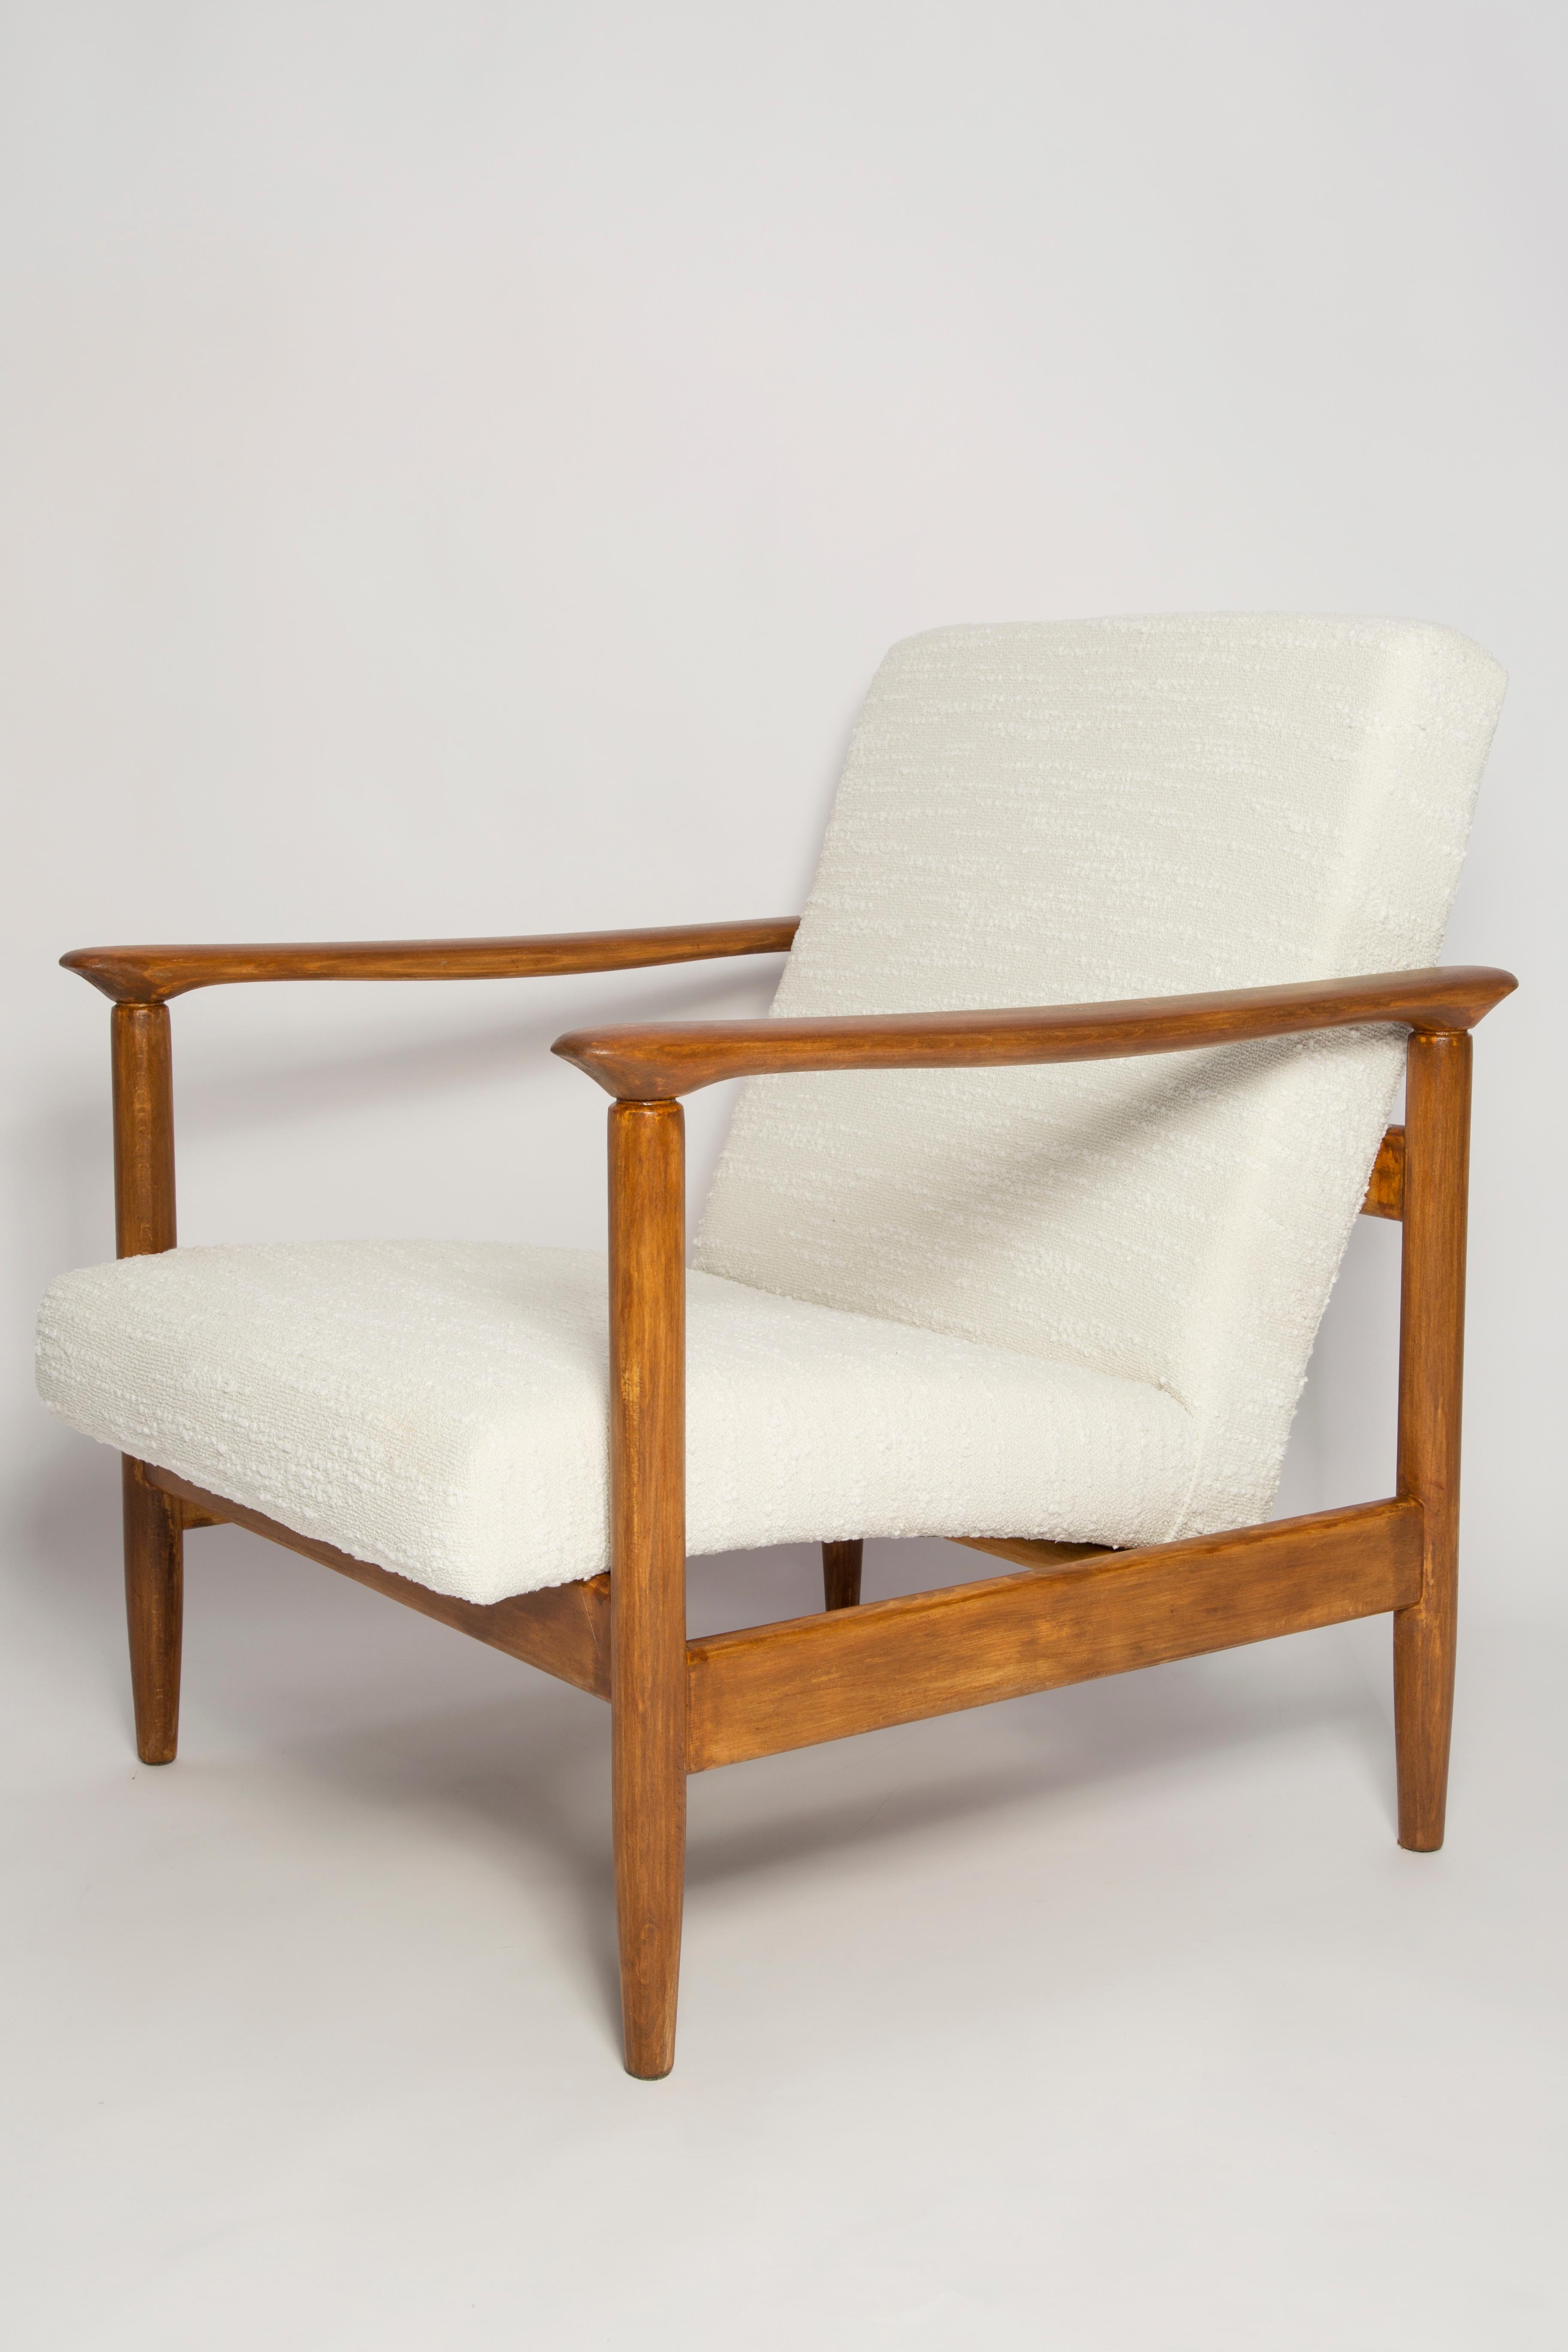 Pair of Mid Century White Boucle Armchairs, GFM 142, Edmund Homa, Europe, 1960s For Sale 6